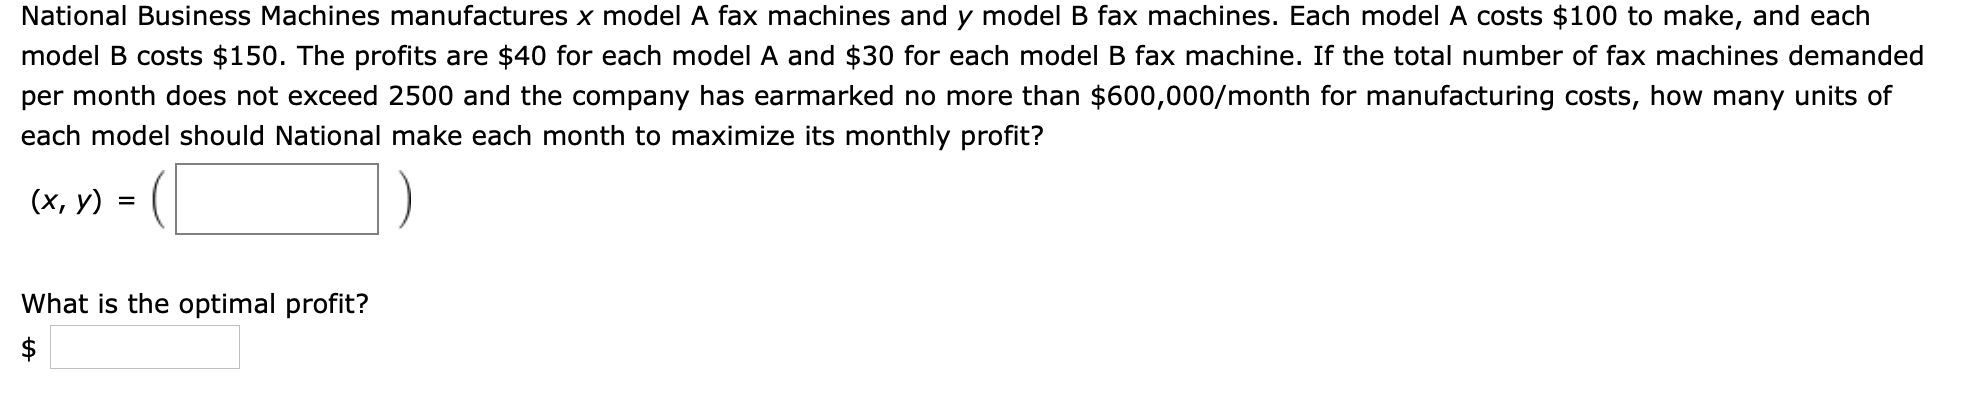 National Business Machines manufactures x model A fax machines and y model B fax machines. Each model A costs $100 to make, and each
model B costs $150. The profits are $40 for each model A and $30 for each model B fax machine. If the total number of fax machines demanded
per month does not exceed 2500 and the company has earmarked no more than $600,000/month for manufacturing costs, how many units of
each model should National make each month to maximize its monthly profit?
(х, у)
What is the optimal profit?
